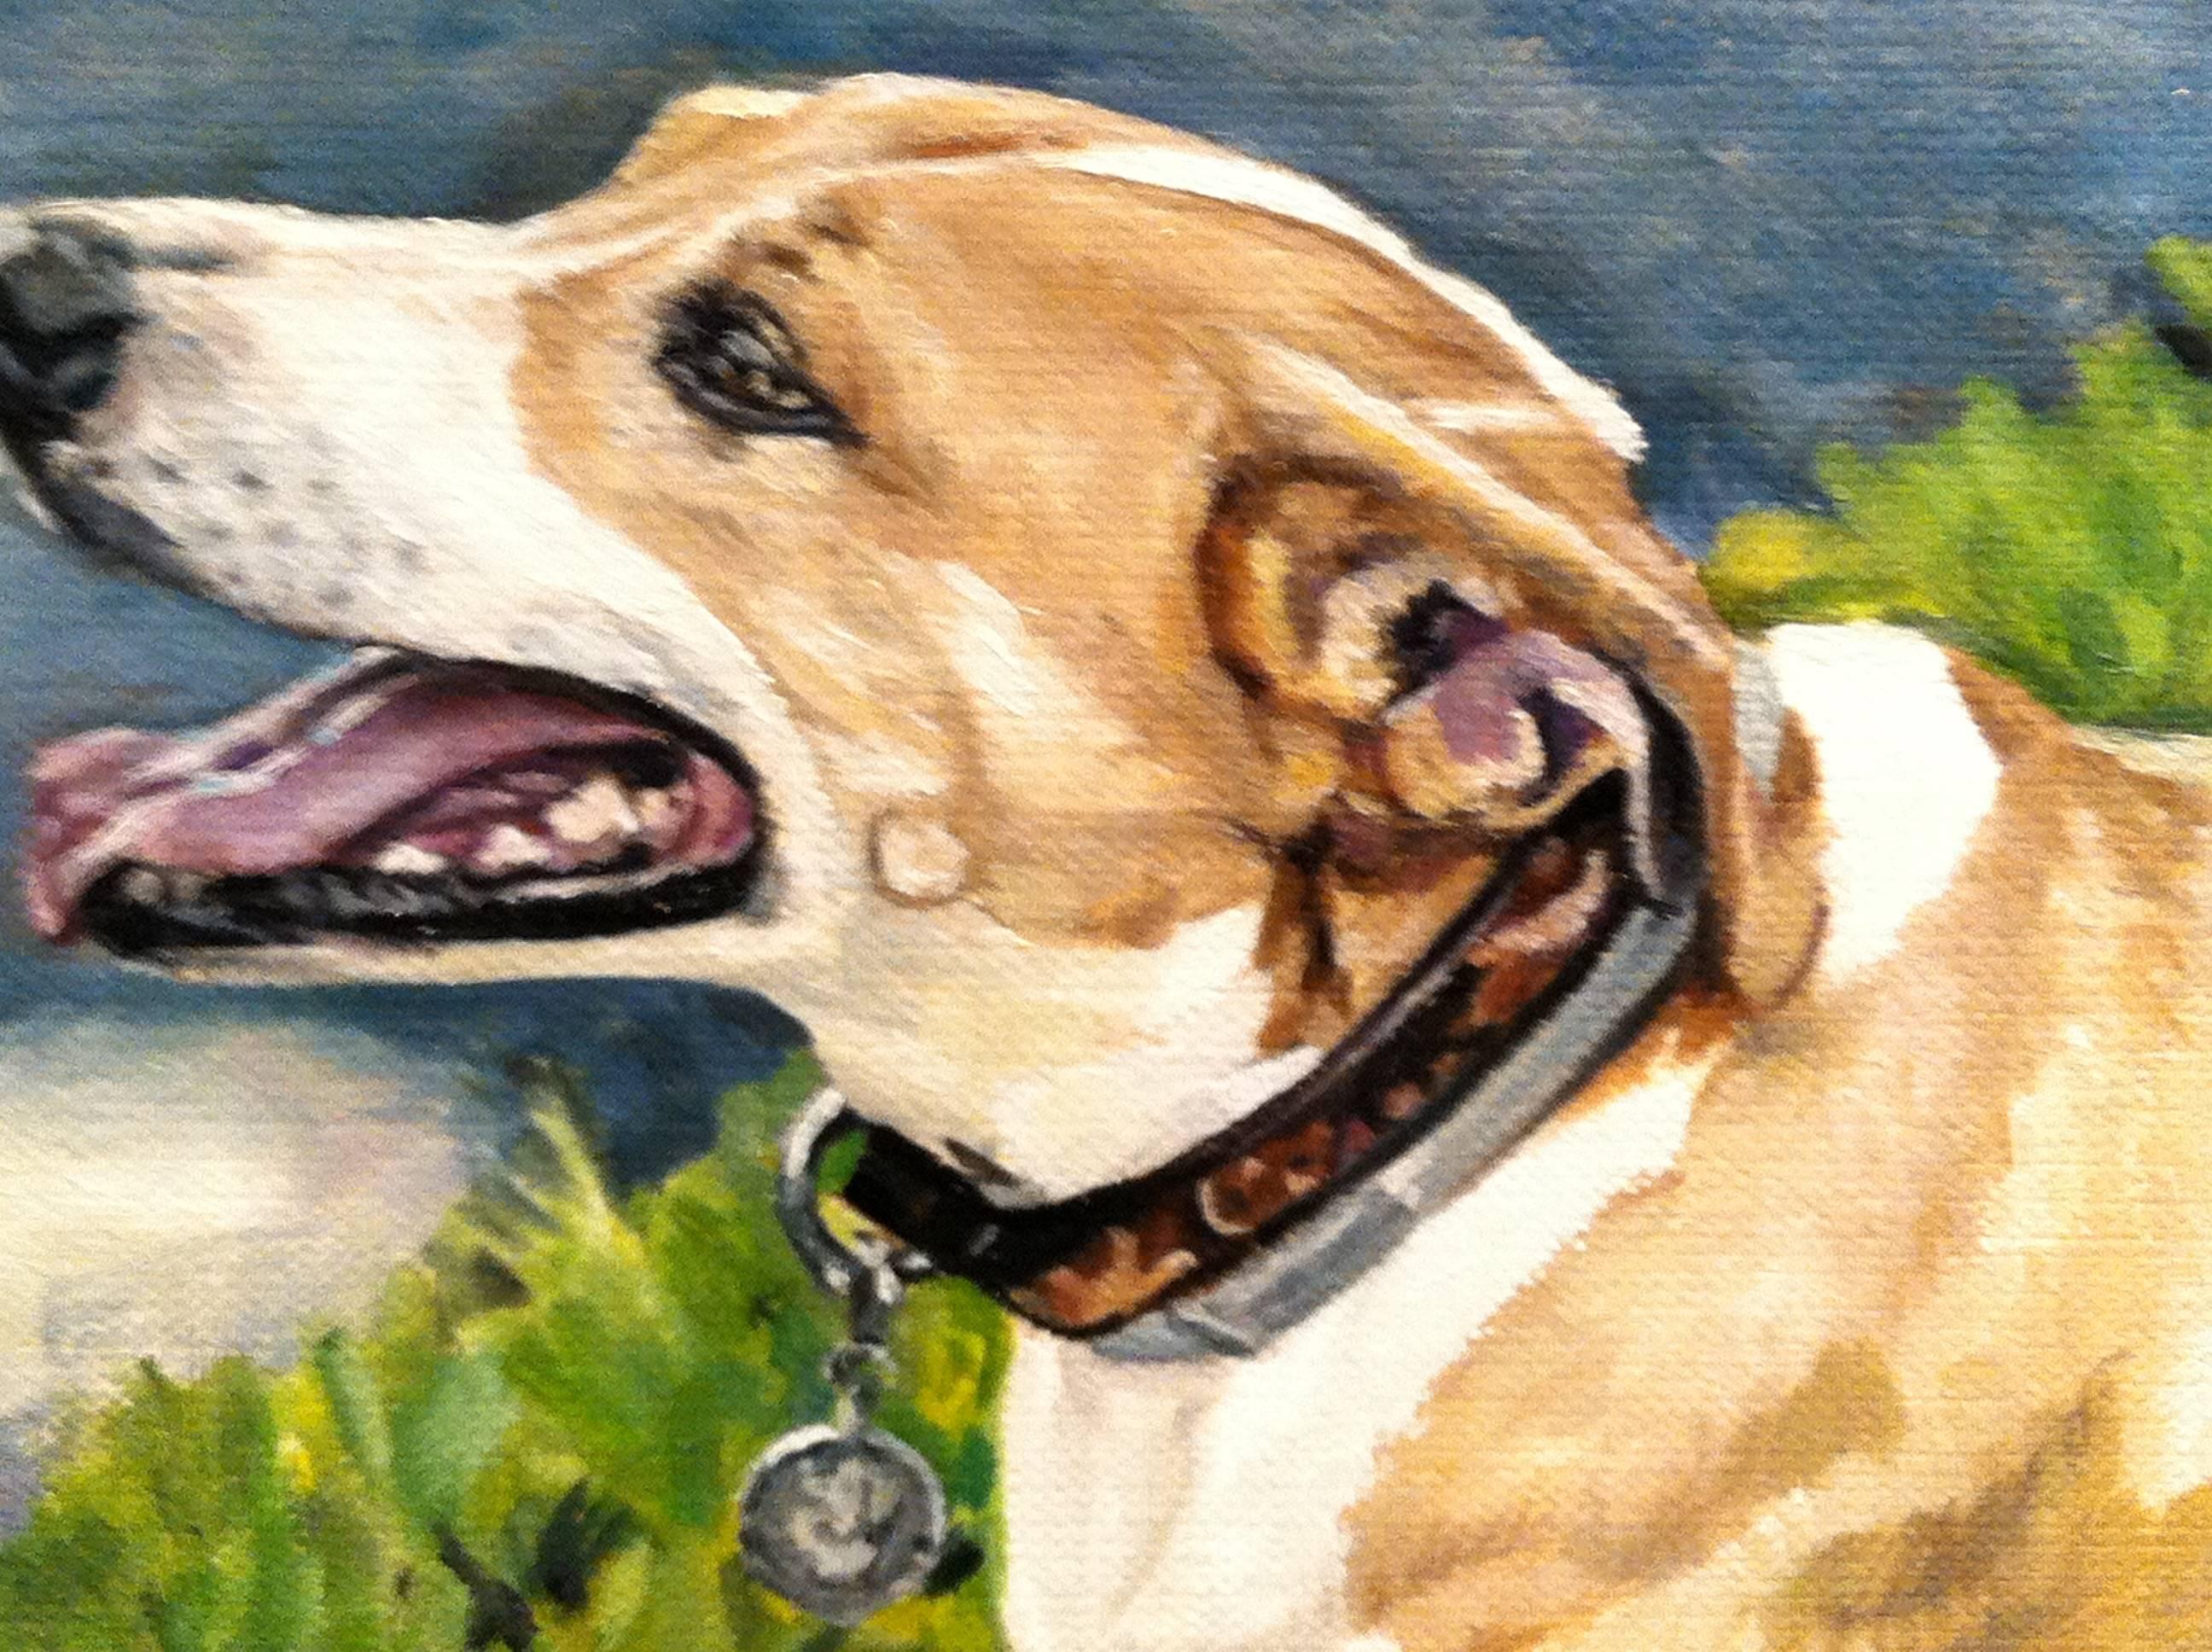 Izzy - Painting by Jakeb Kristiansen